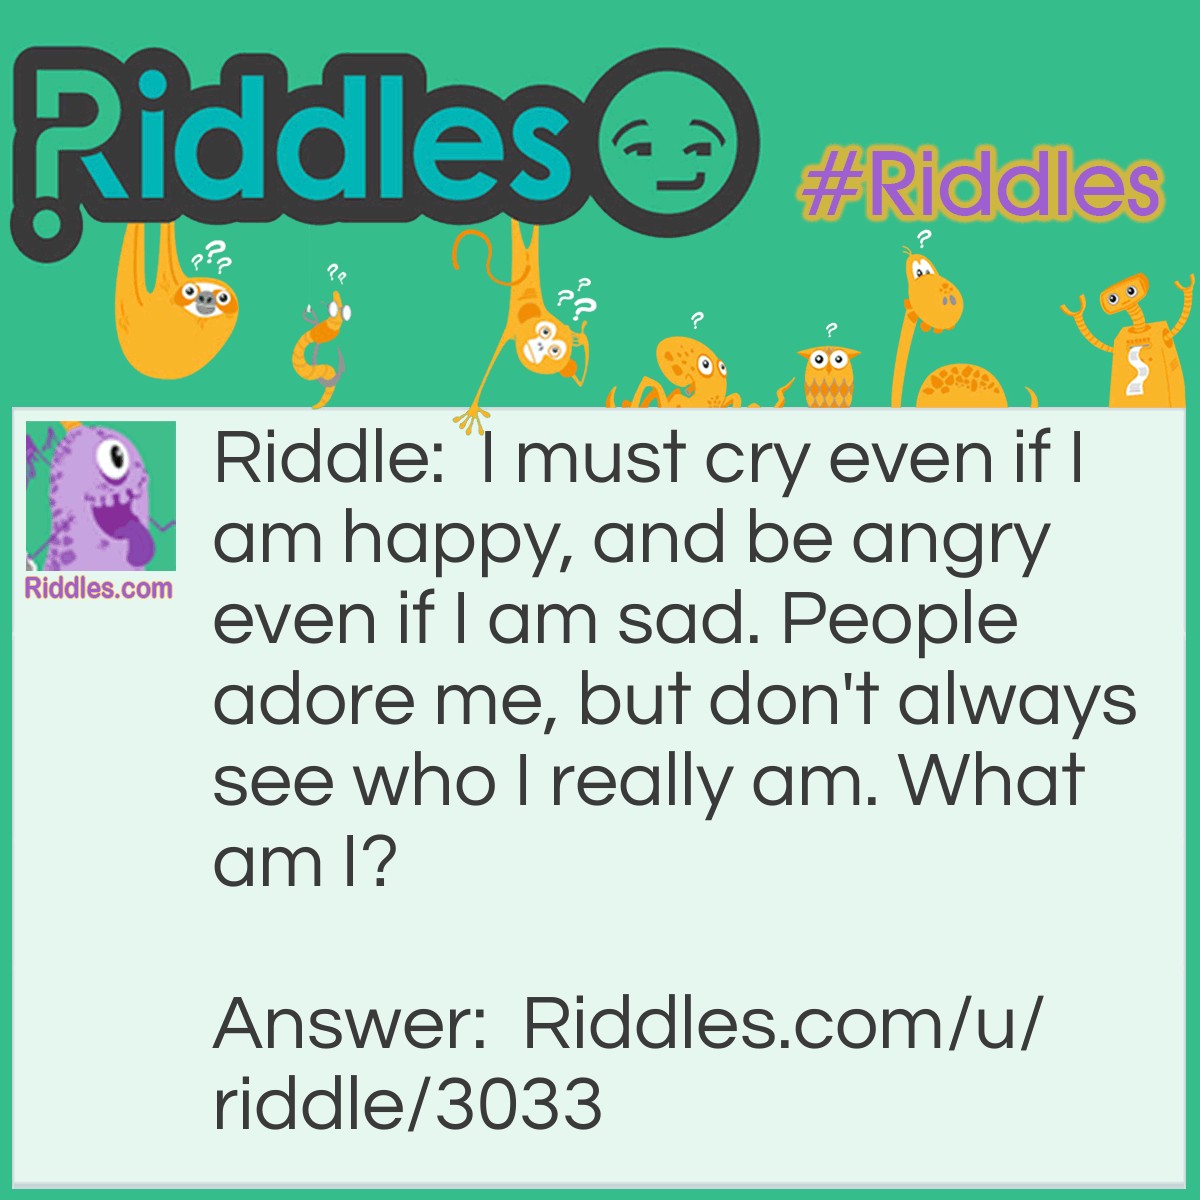 Riddle: I must cry even if I am happy, and be angry even if I am sad. People adore me, but don't always see who I really am. What am I? Answer: I am an Actor.